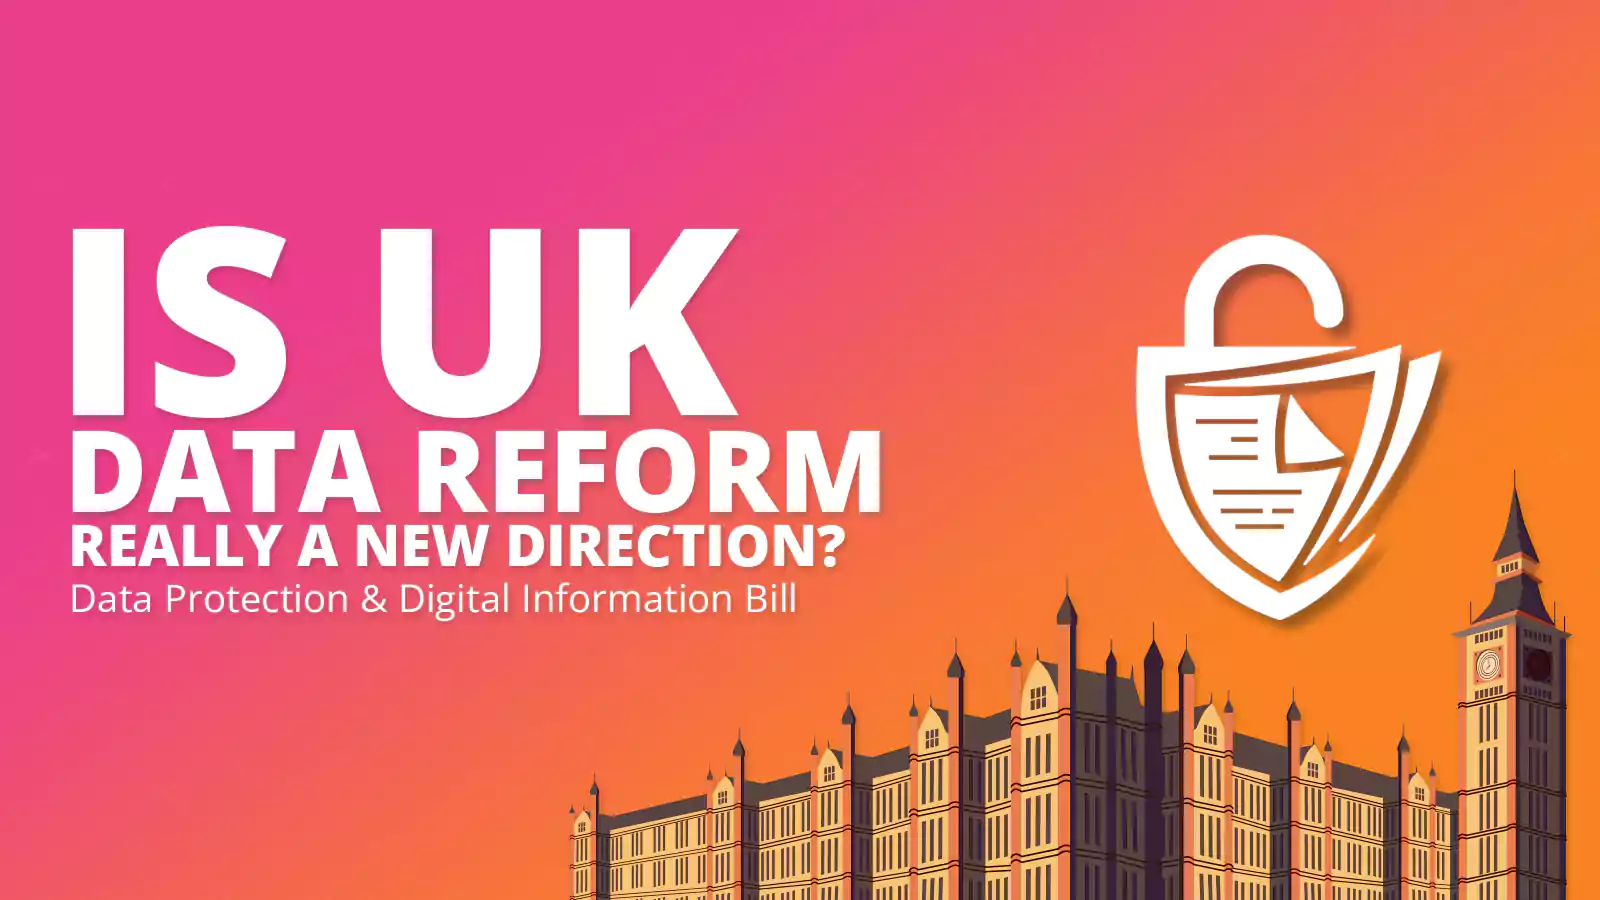 Is the UK Data reform really a new direction?